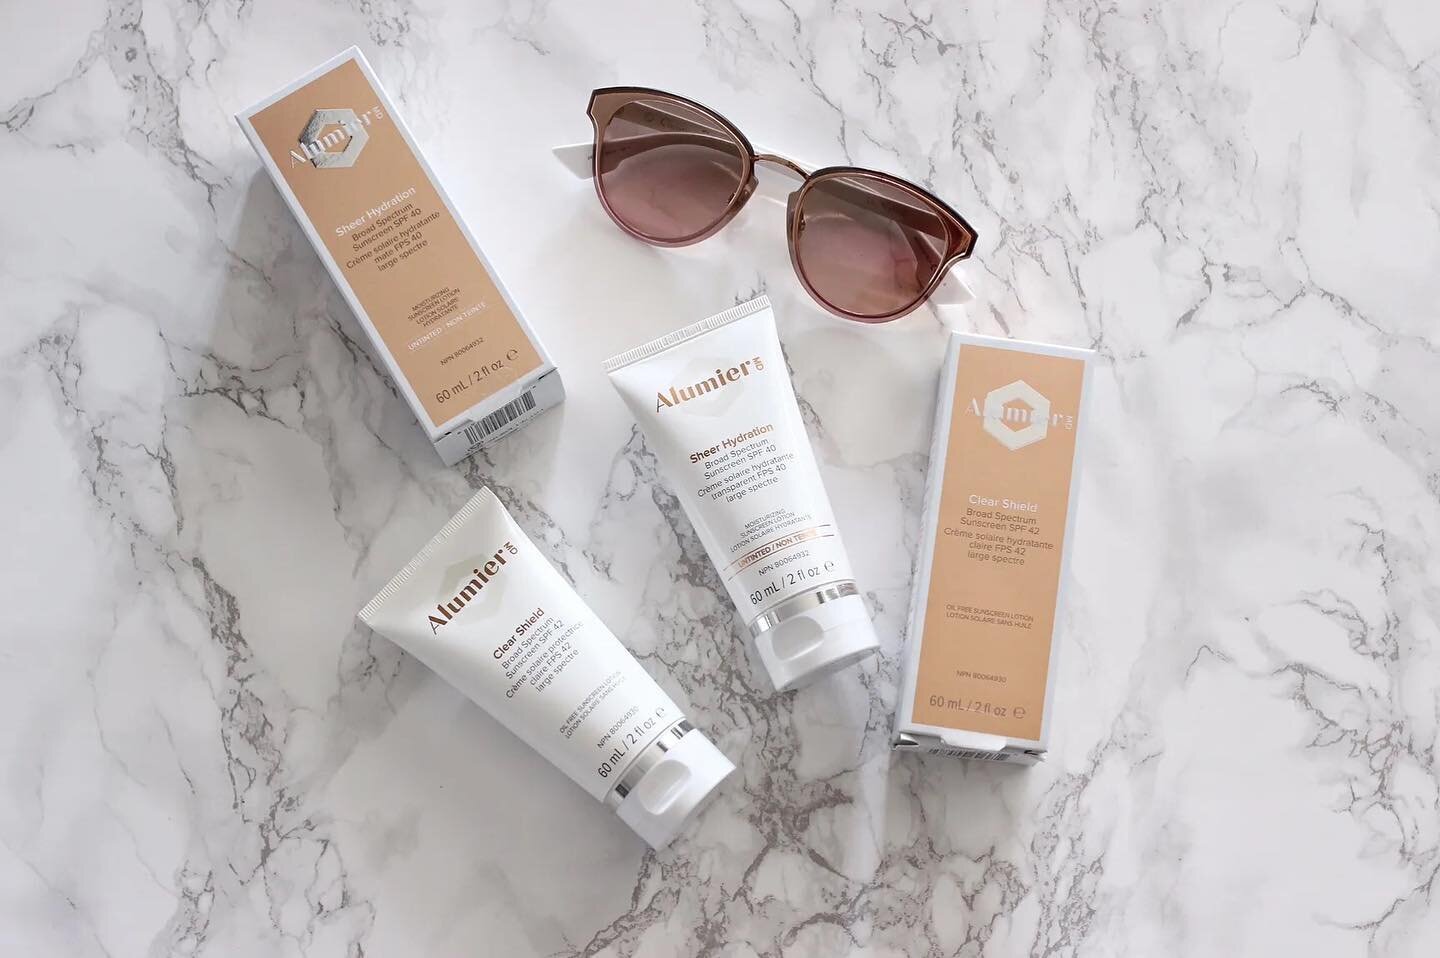 🌿 Product of the month 🌿

Alumier MD Sunscreens ☀️
&pound;40 - UVA &amp; UVB protection

There are 3 types of the Alumier MD sunscreens that are suitable for all skin types. They are all physical sunscreens, meaning the uv rays are reflected off of